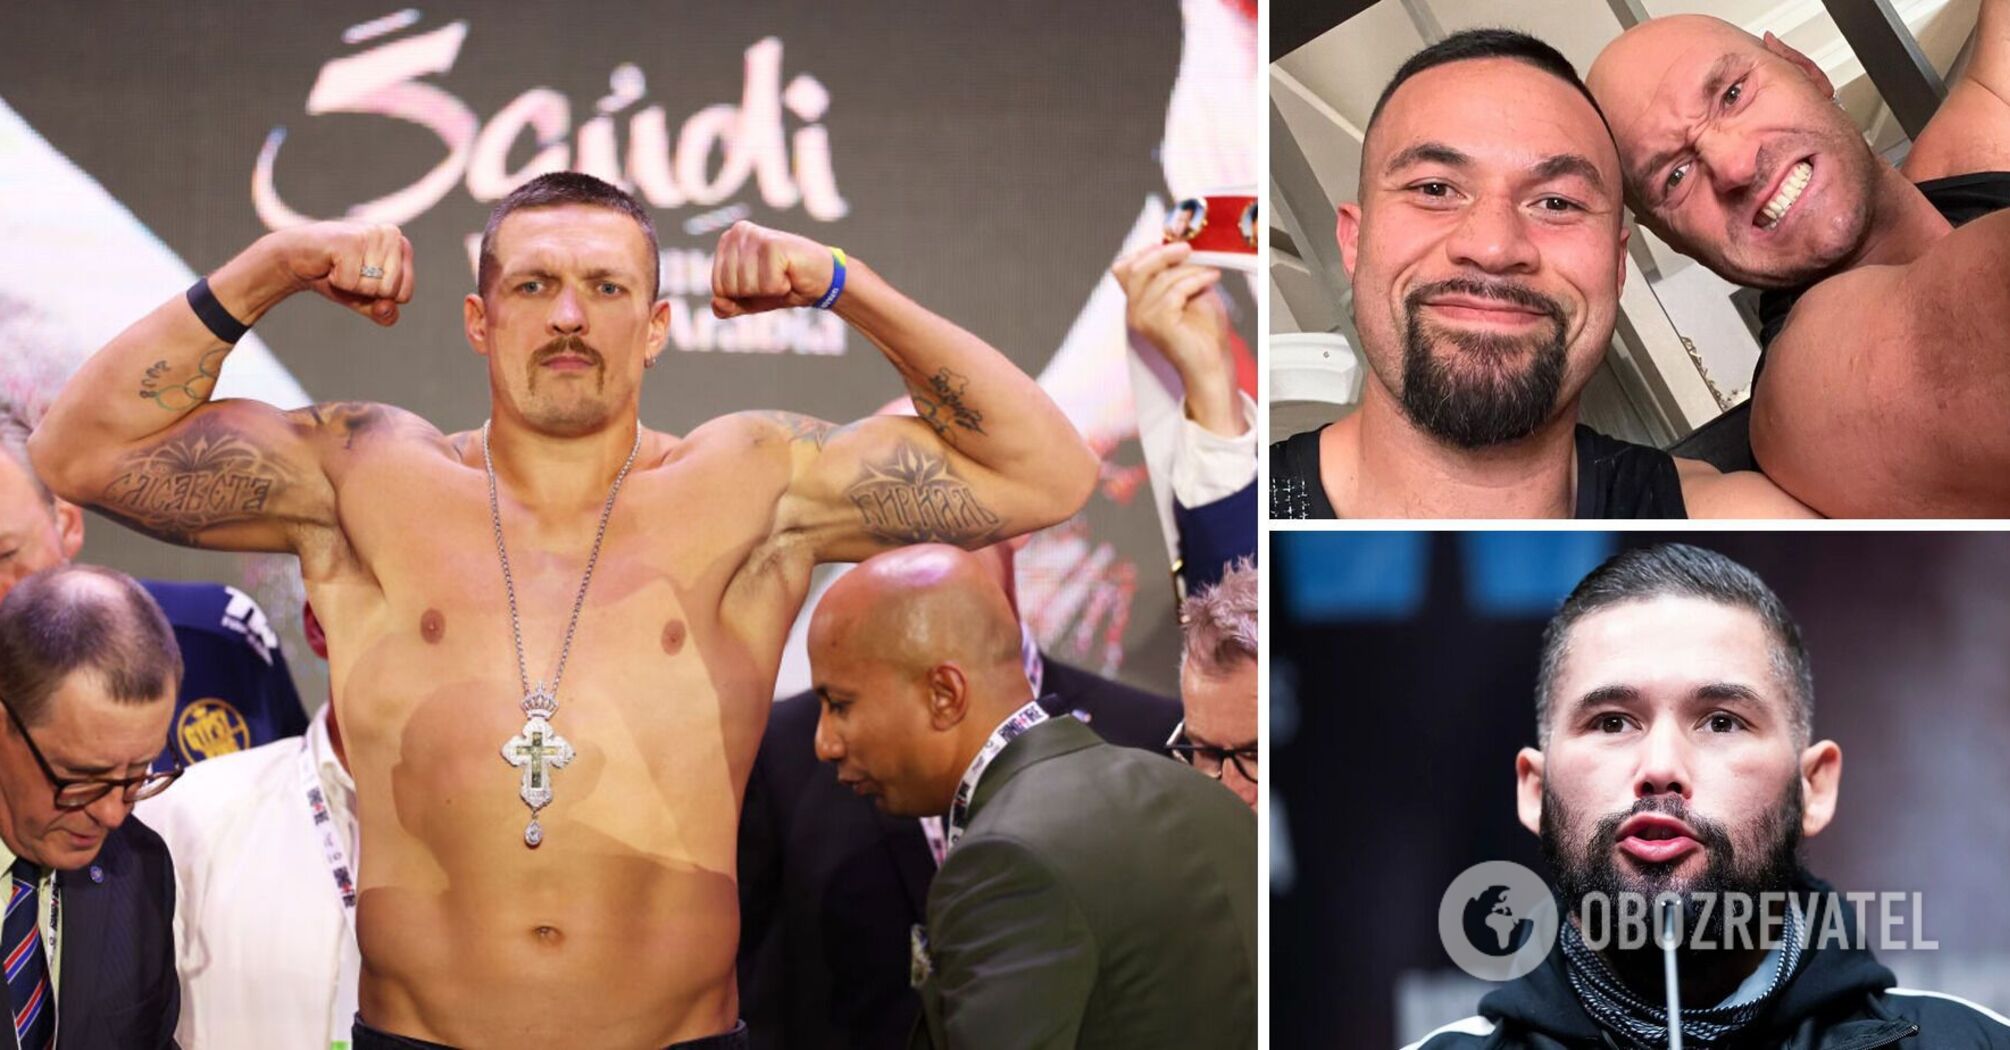 'It would be astronomical': former world heavyweight Bellew proposes a new sparring partner for Usyk instead of Fury